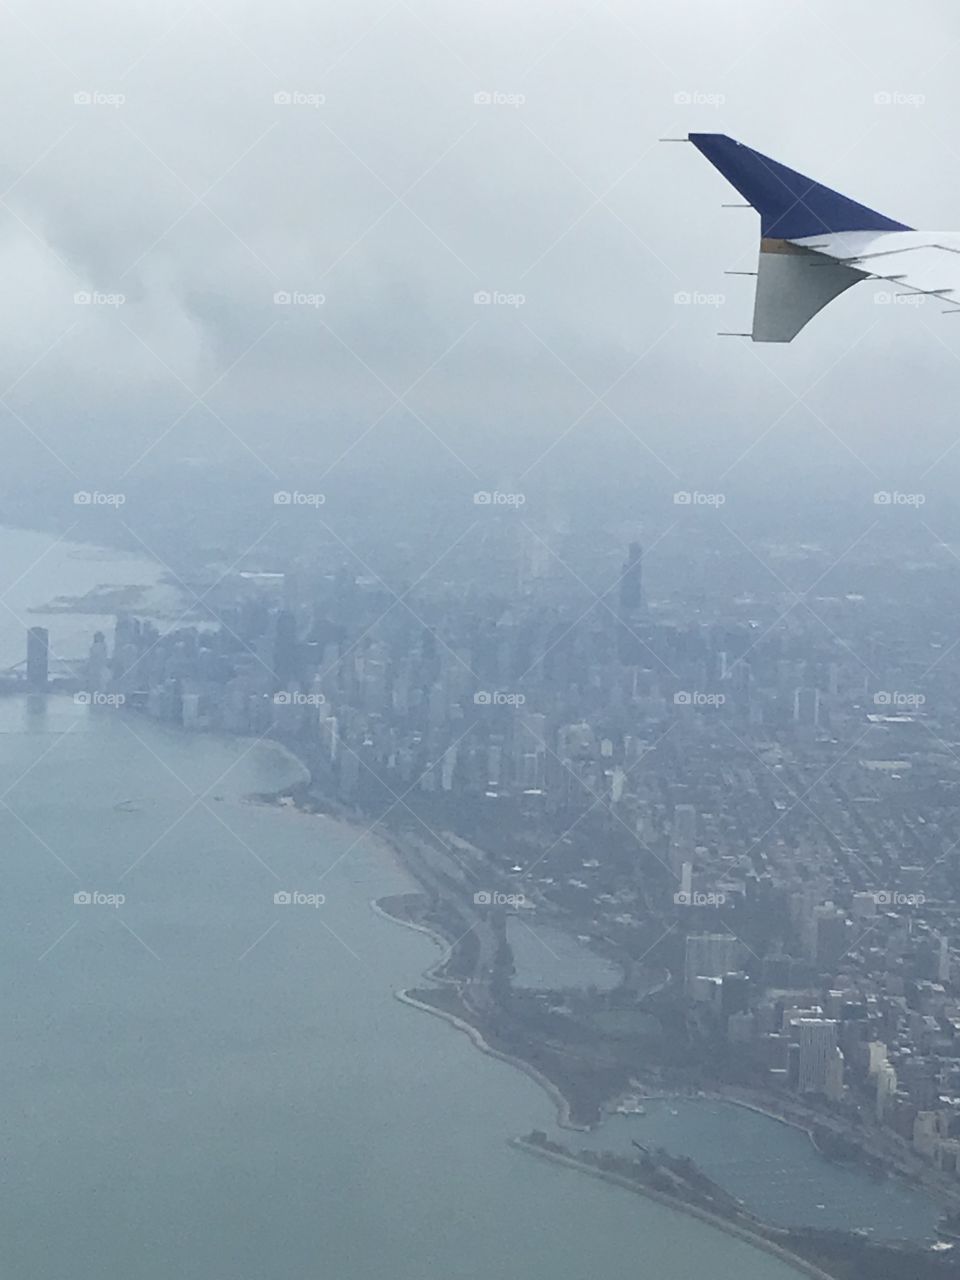 The view of Chicago from above